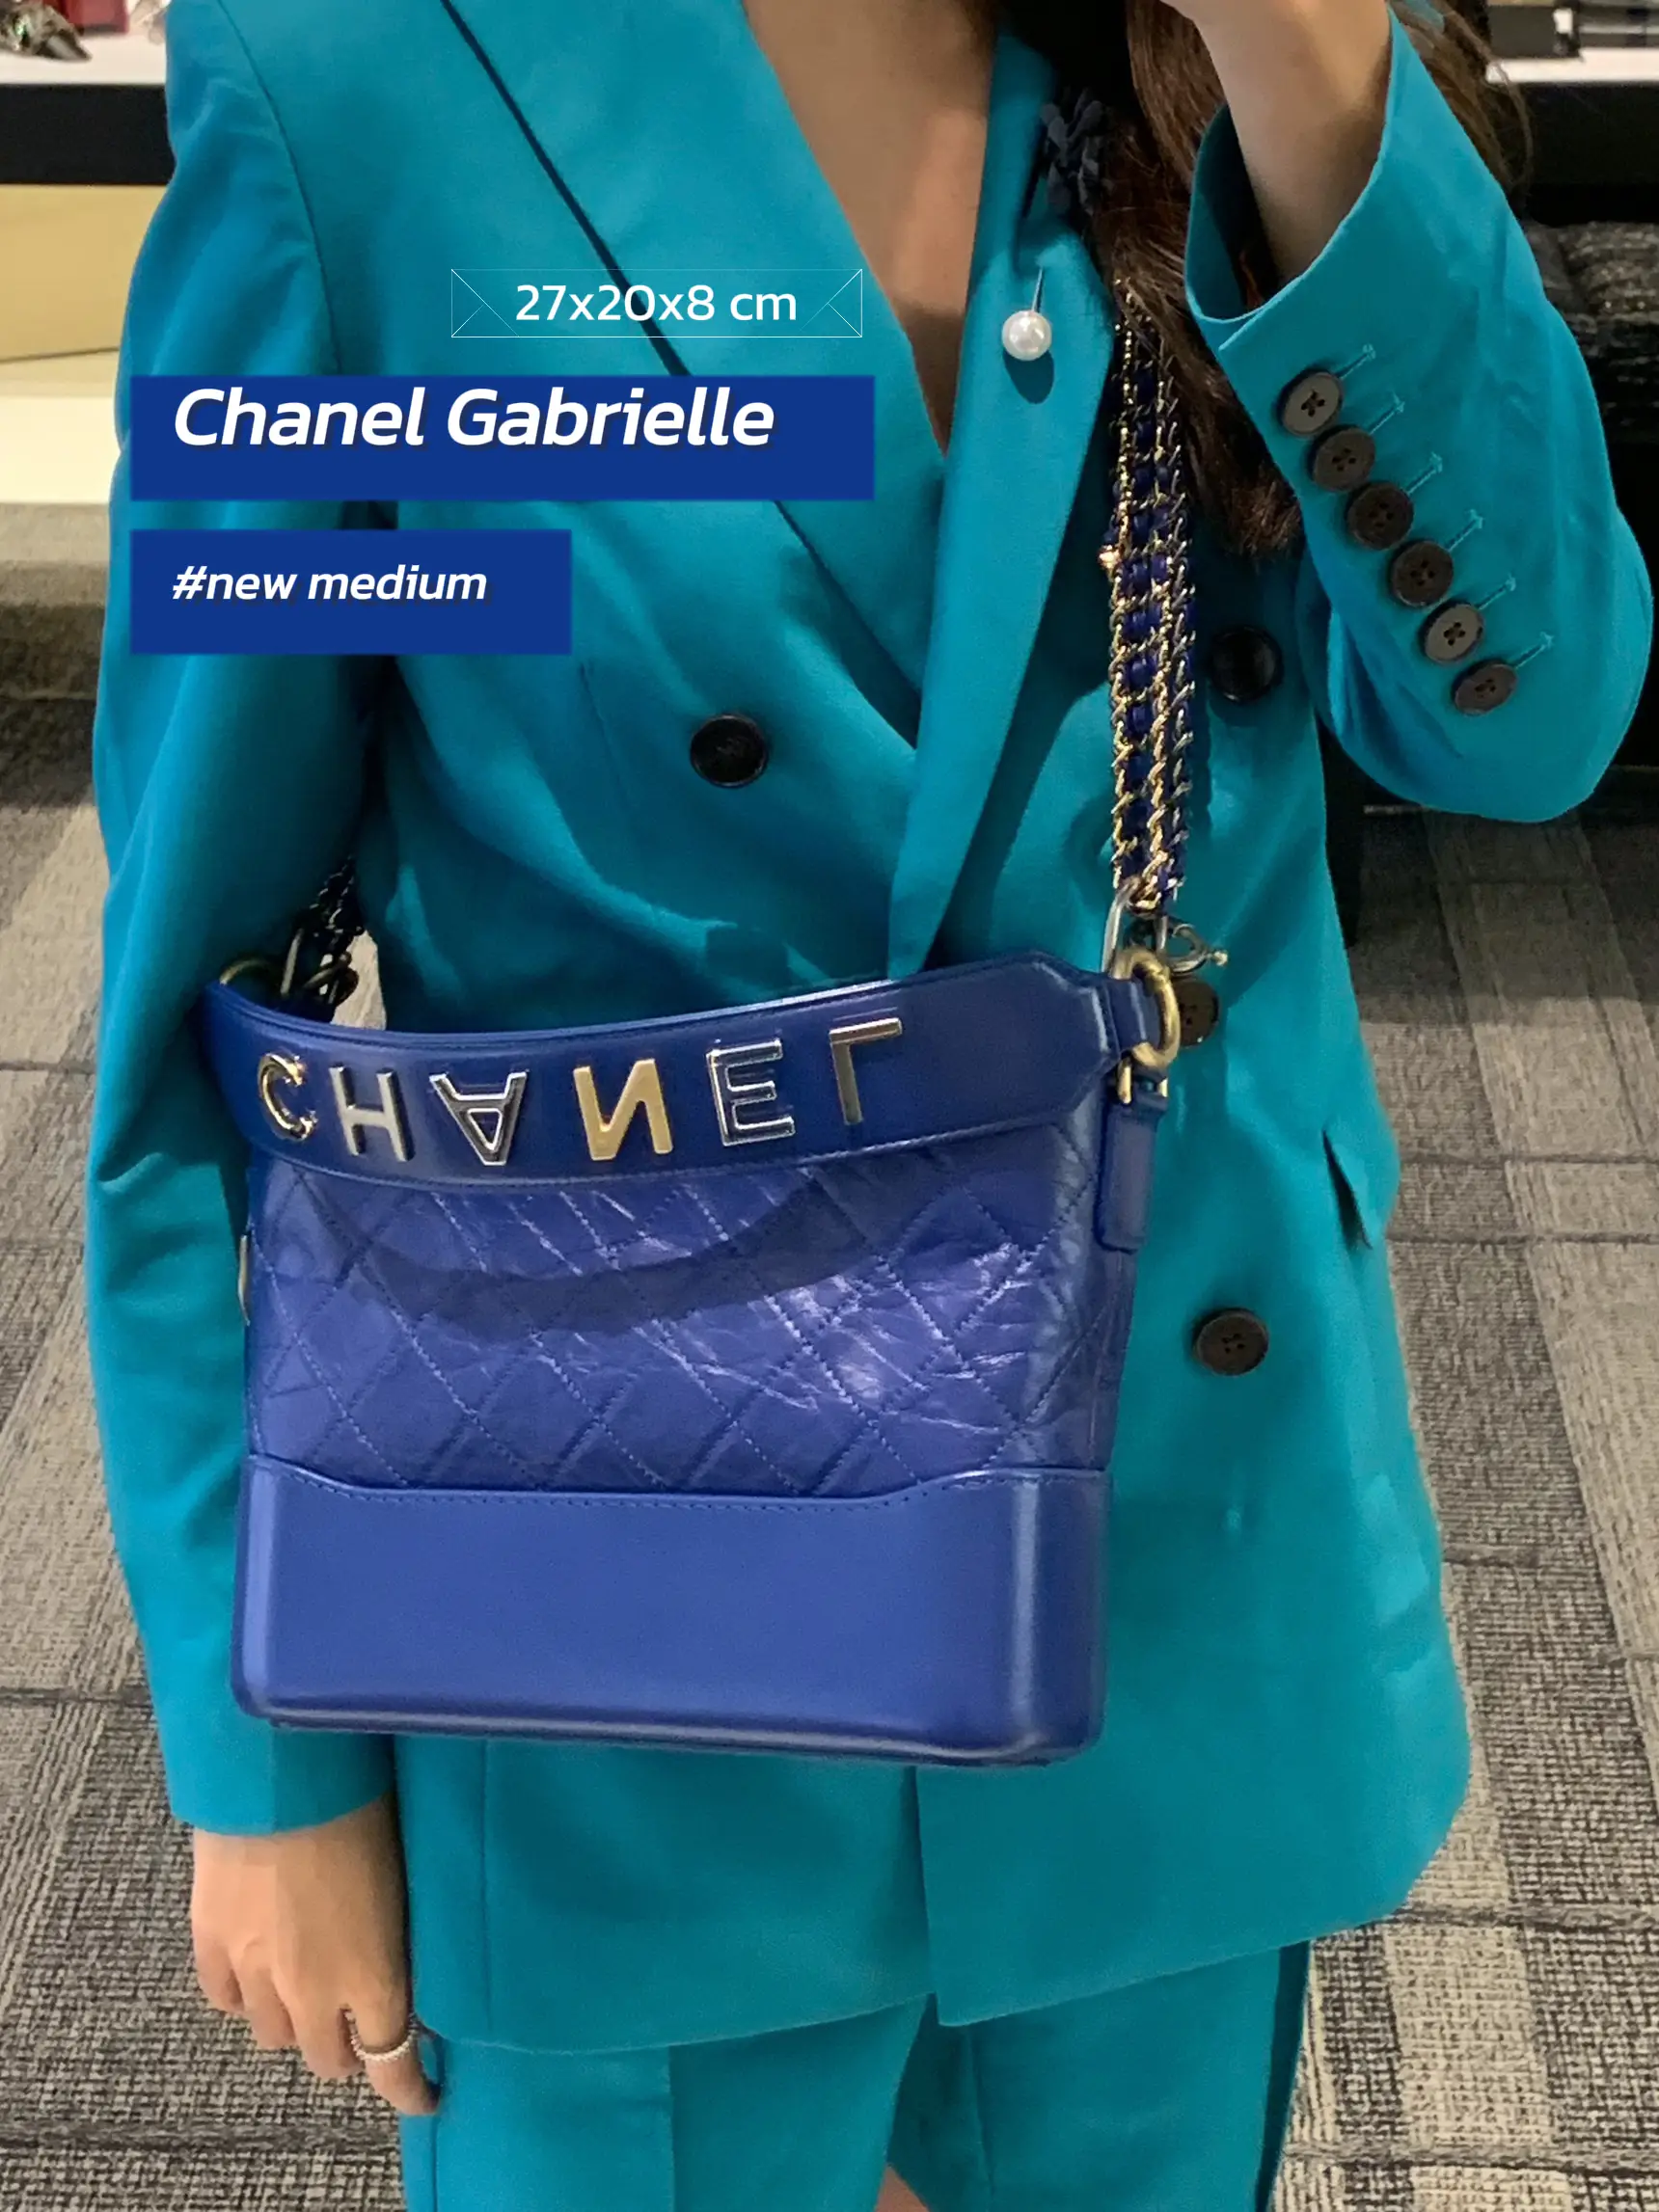 Is Chanel Gabrielle worth it? How to dress?